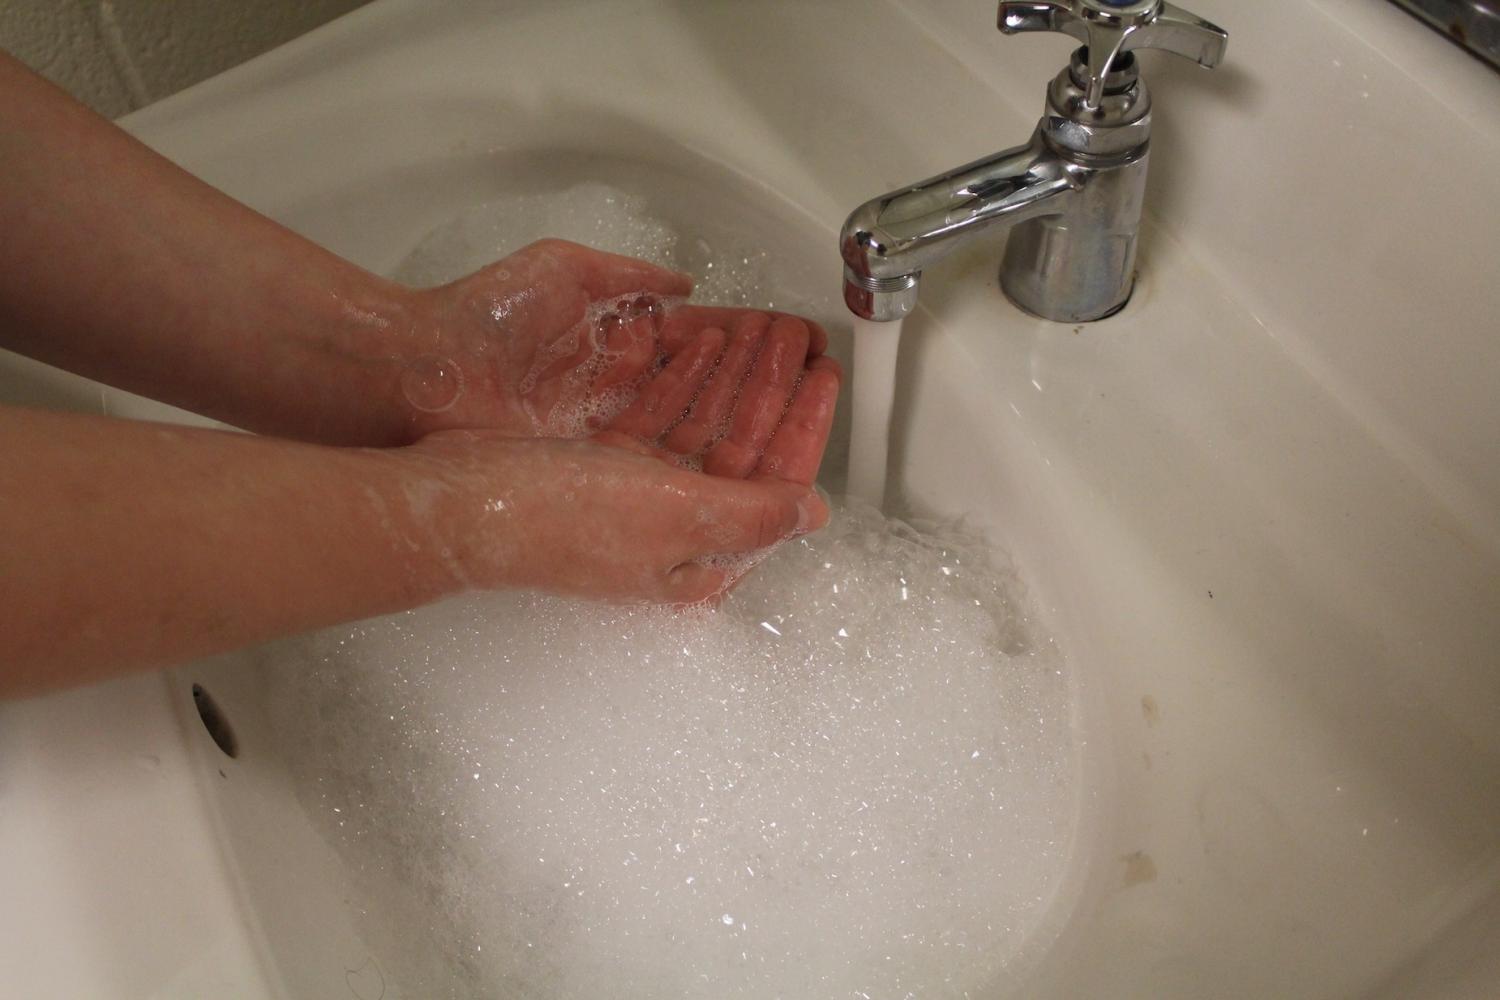 Washing hands with soap and lukewarm water helps prevent germs from entering the body through contact with the mouth and nose. 
